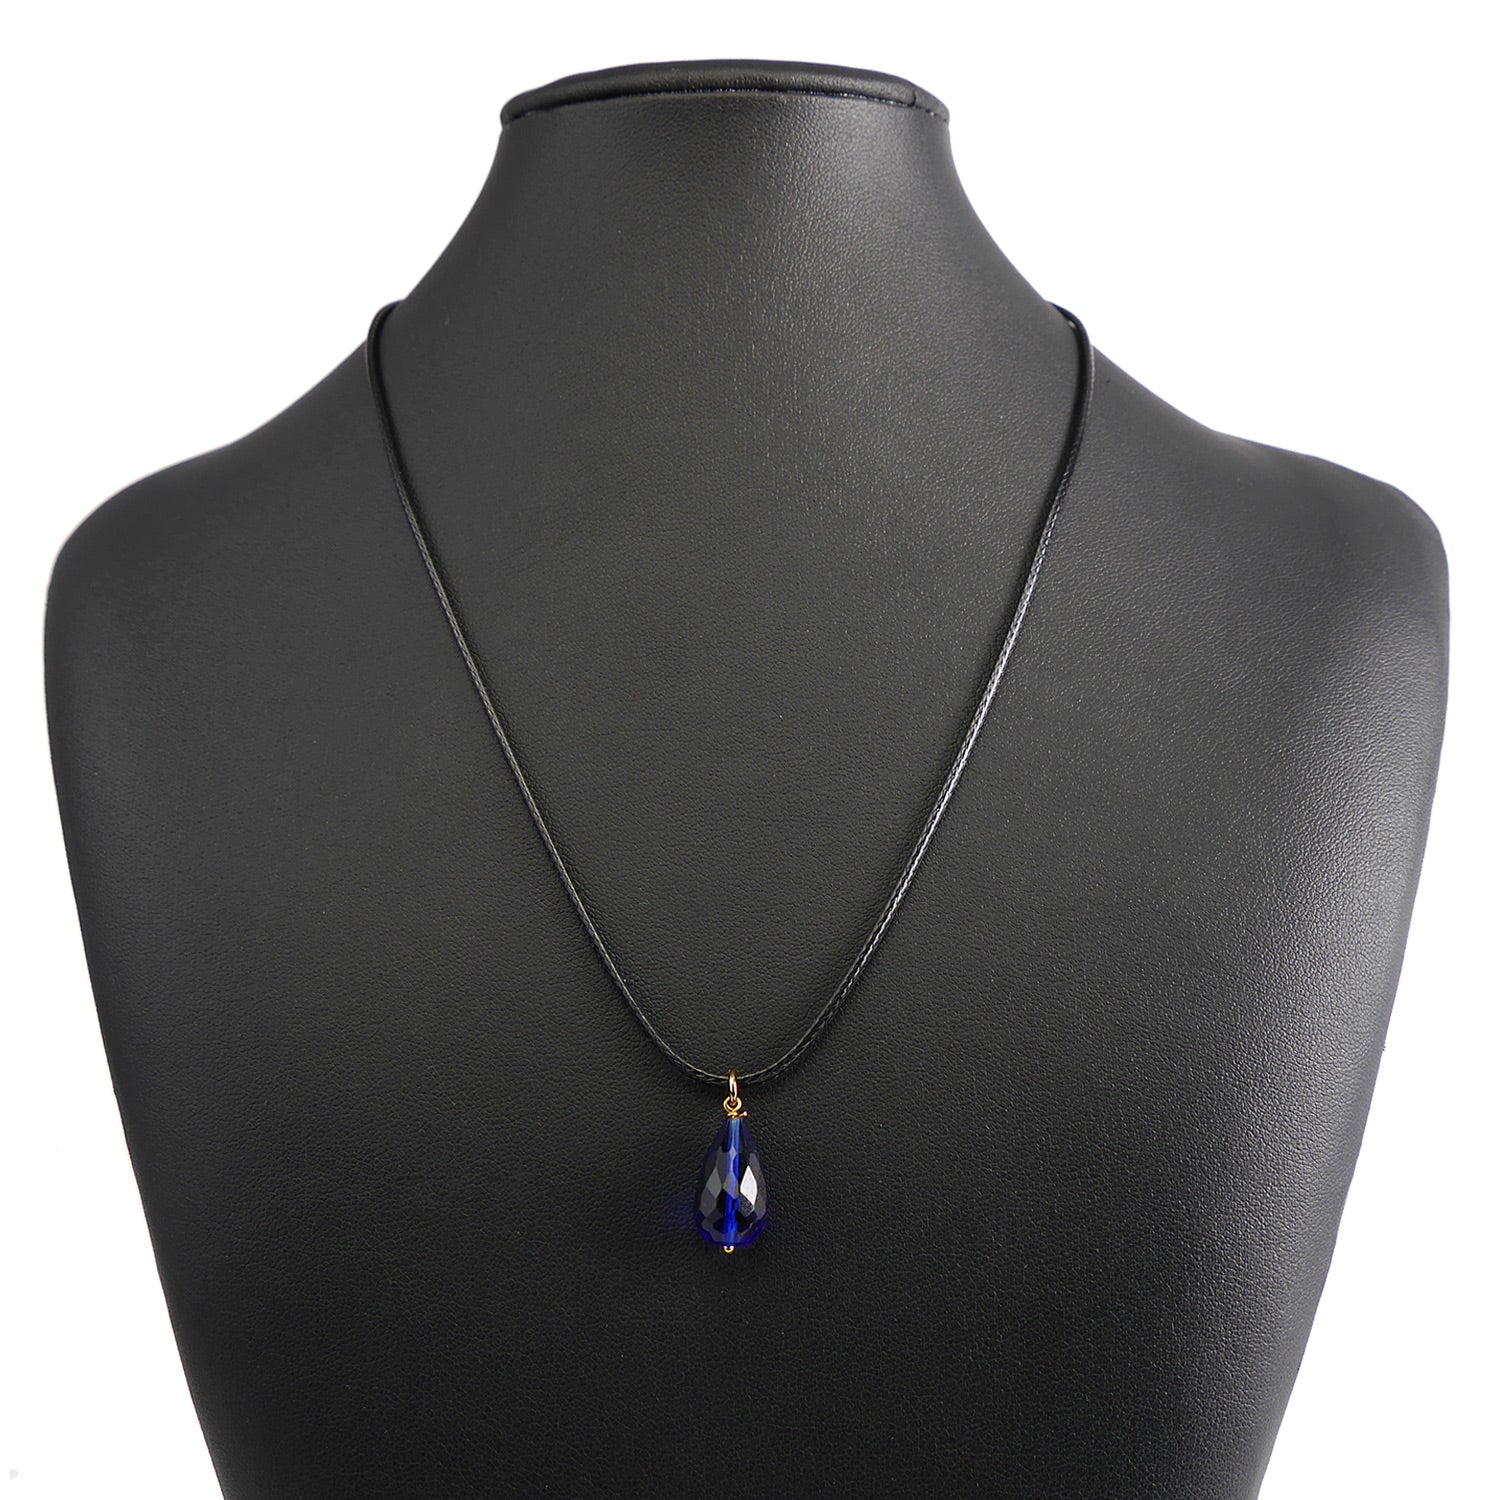 Faux Leather Necklace with Blue Crystal